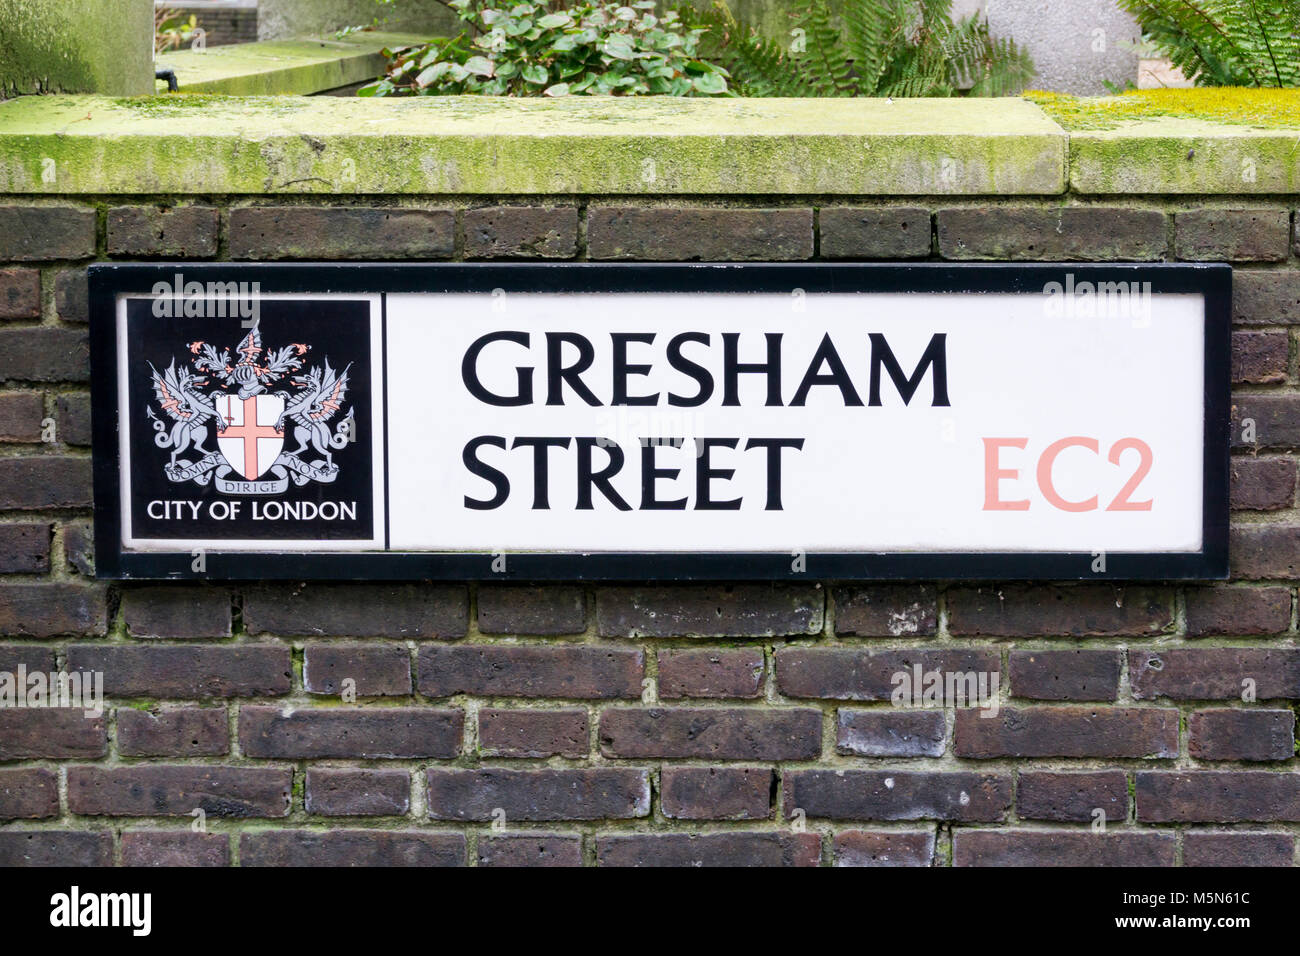 Street sign for Gresham Street in the City of London Stock Photo